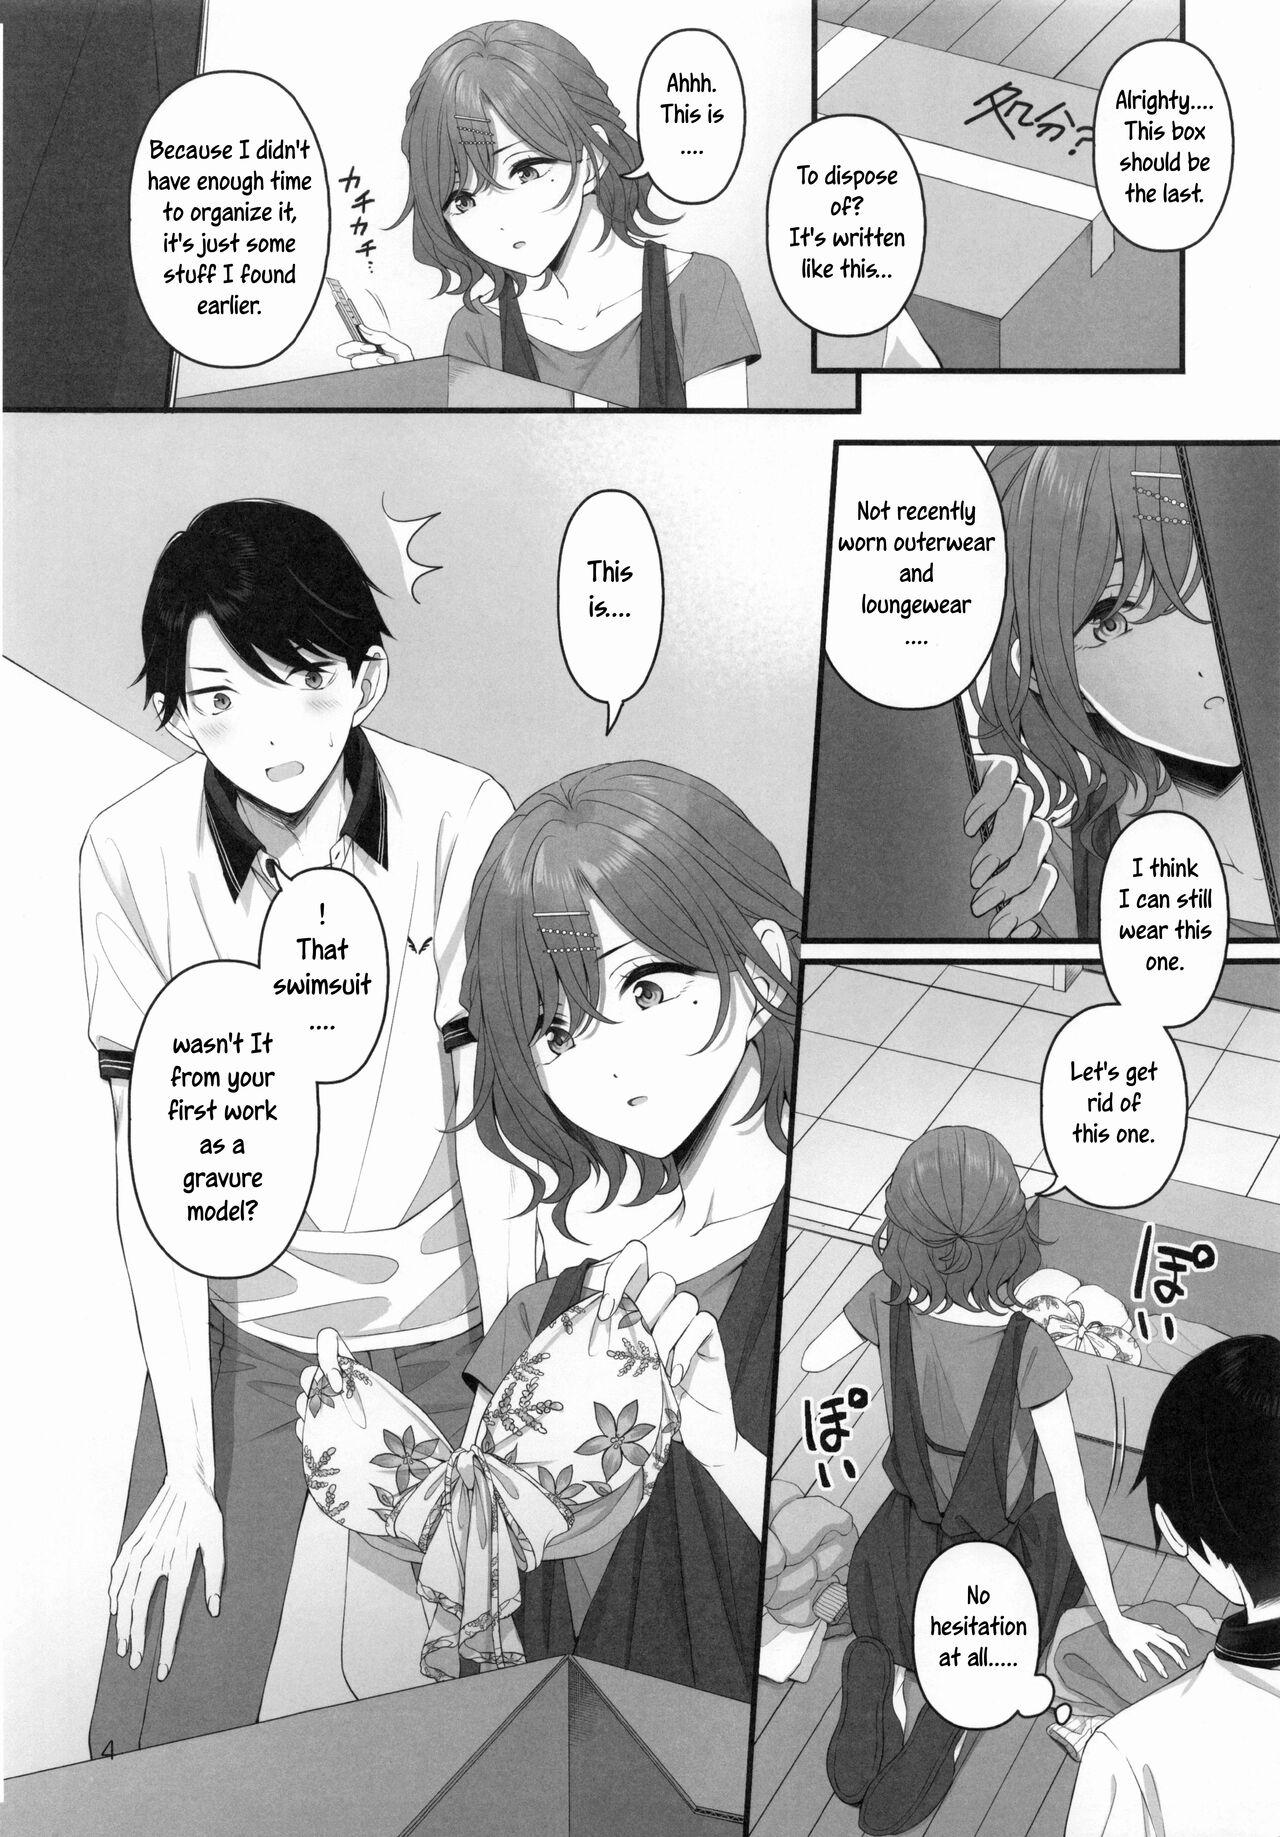 Rub Spit it Out! - The idolmaster Muslim - Page 4